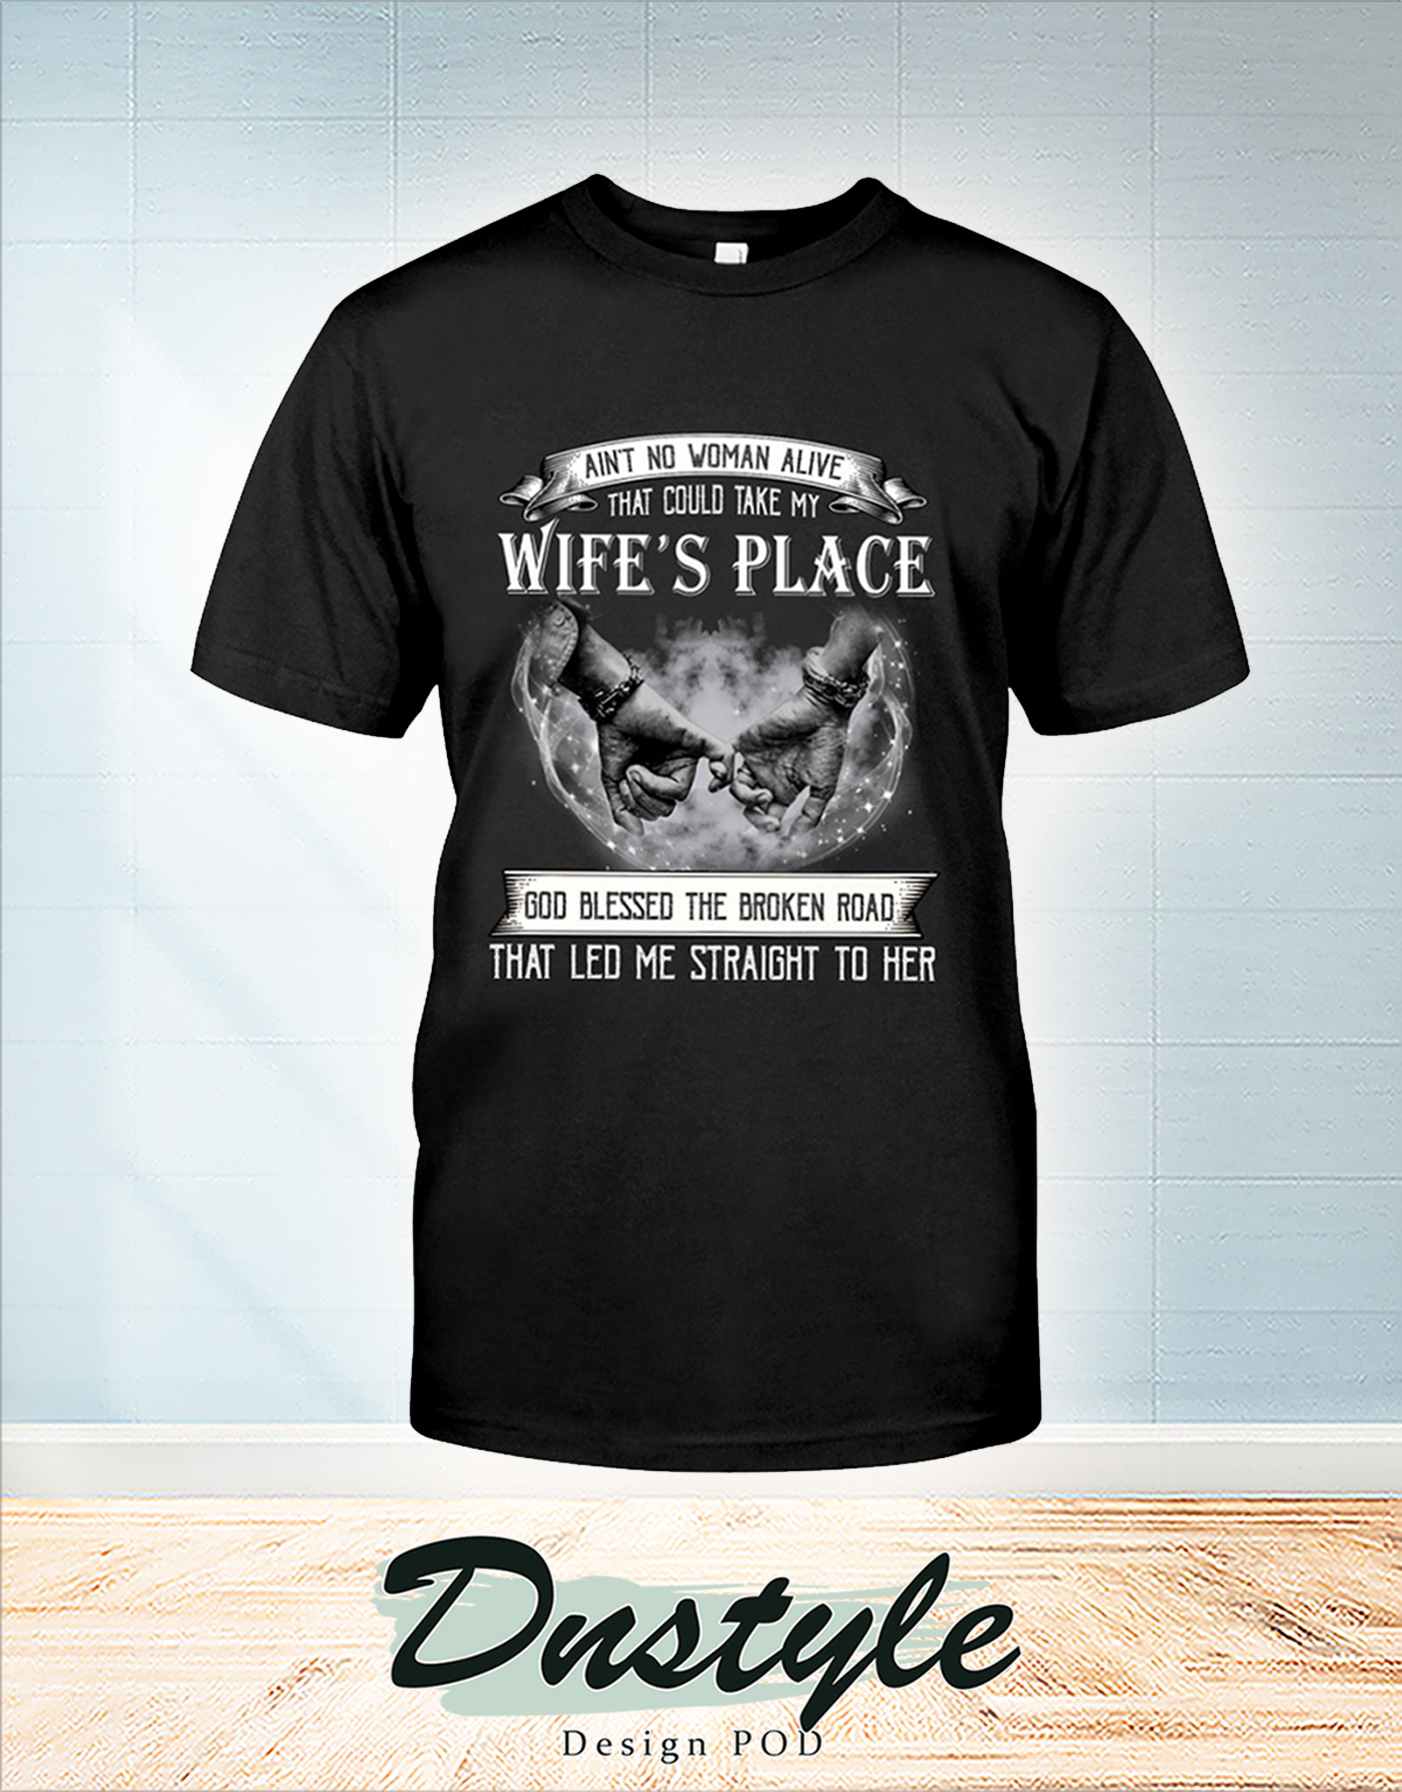 Ain't no man alive that could take my wife's place shirt